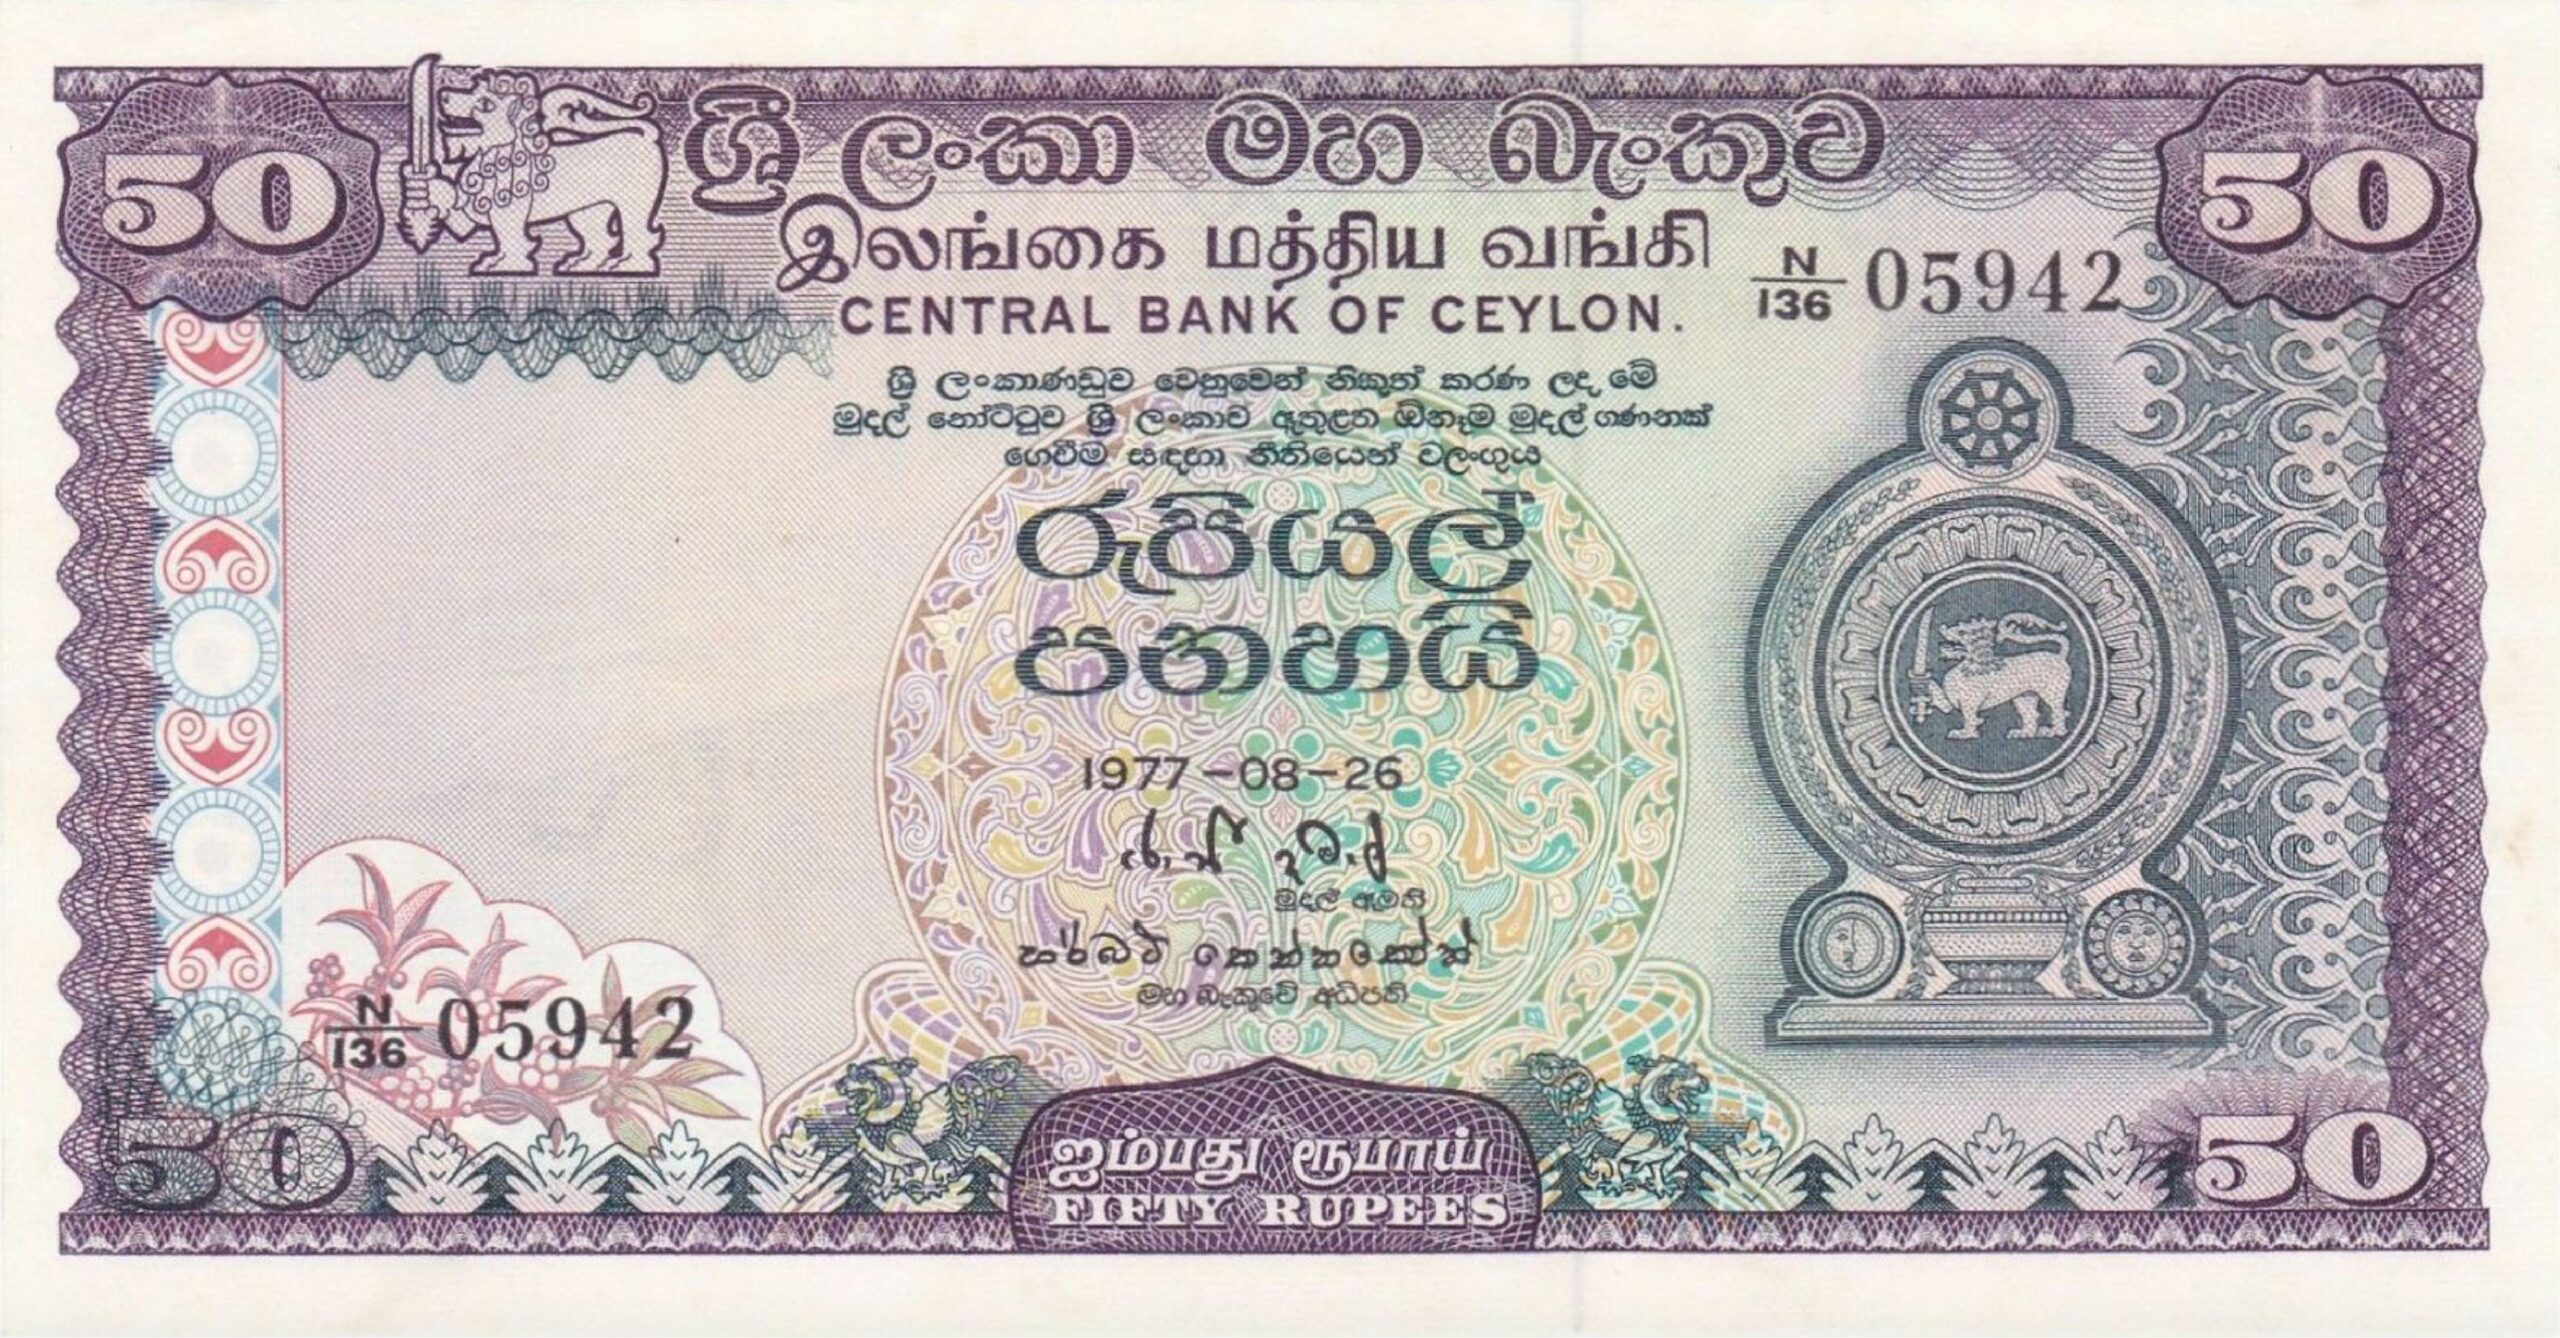 50 rupees Central Bank of Ceylon banknote (Armorial Ensign 1977)